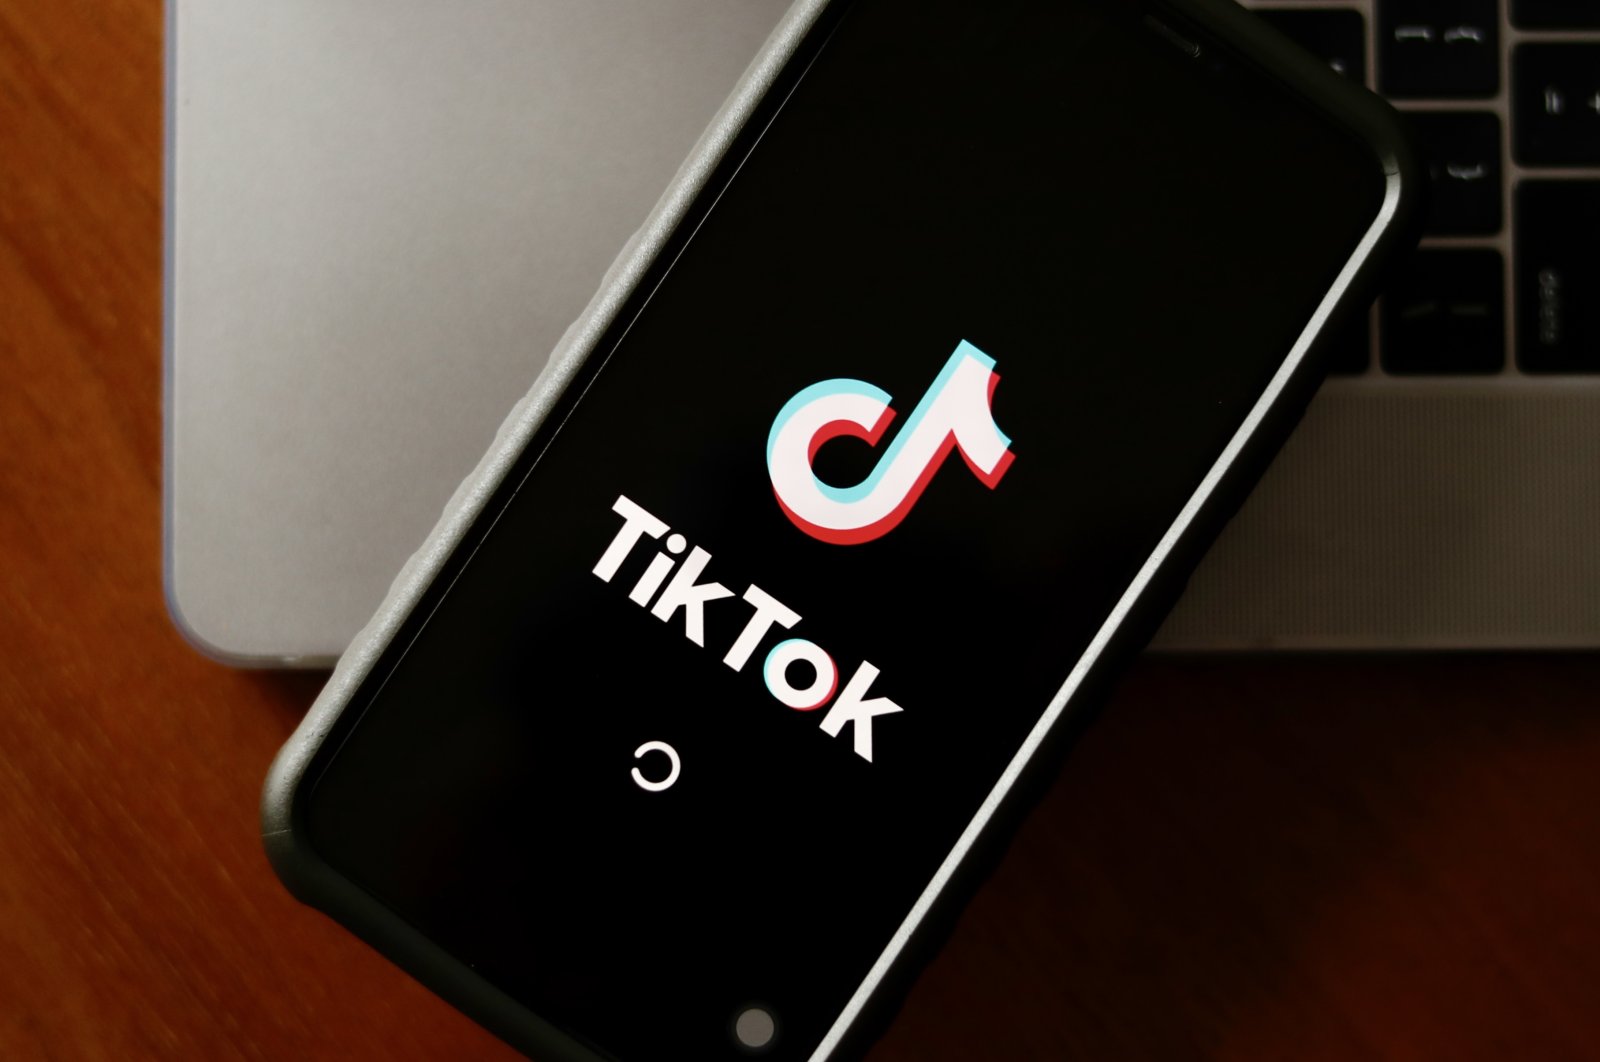 The Tiktok application logo is pictured on a smartphone in Taipei, Taiwan, Dec. 6, 2022. (EPA Photo)